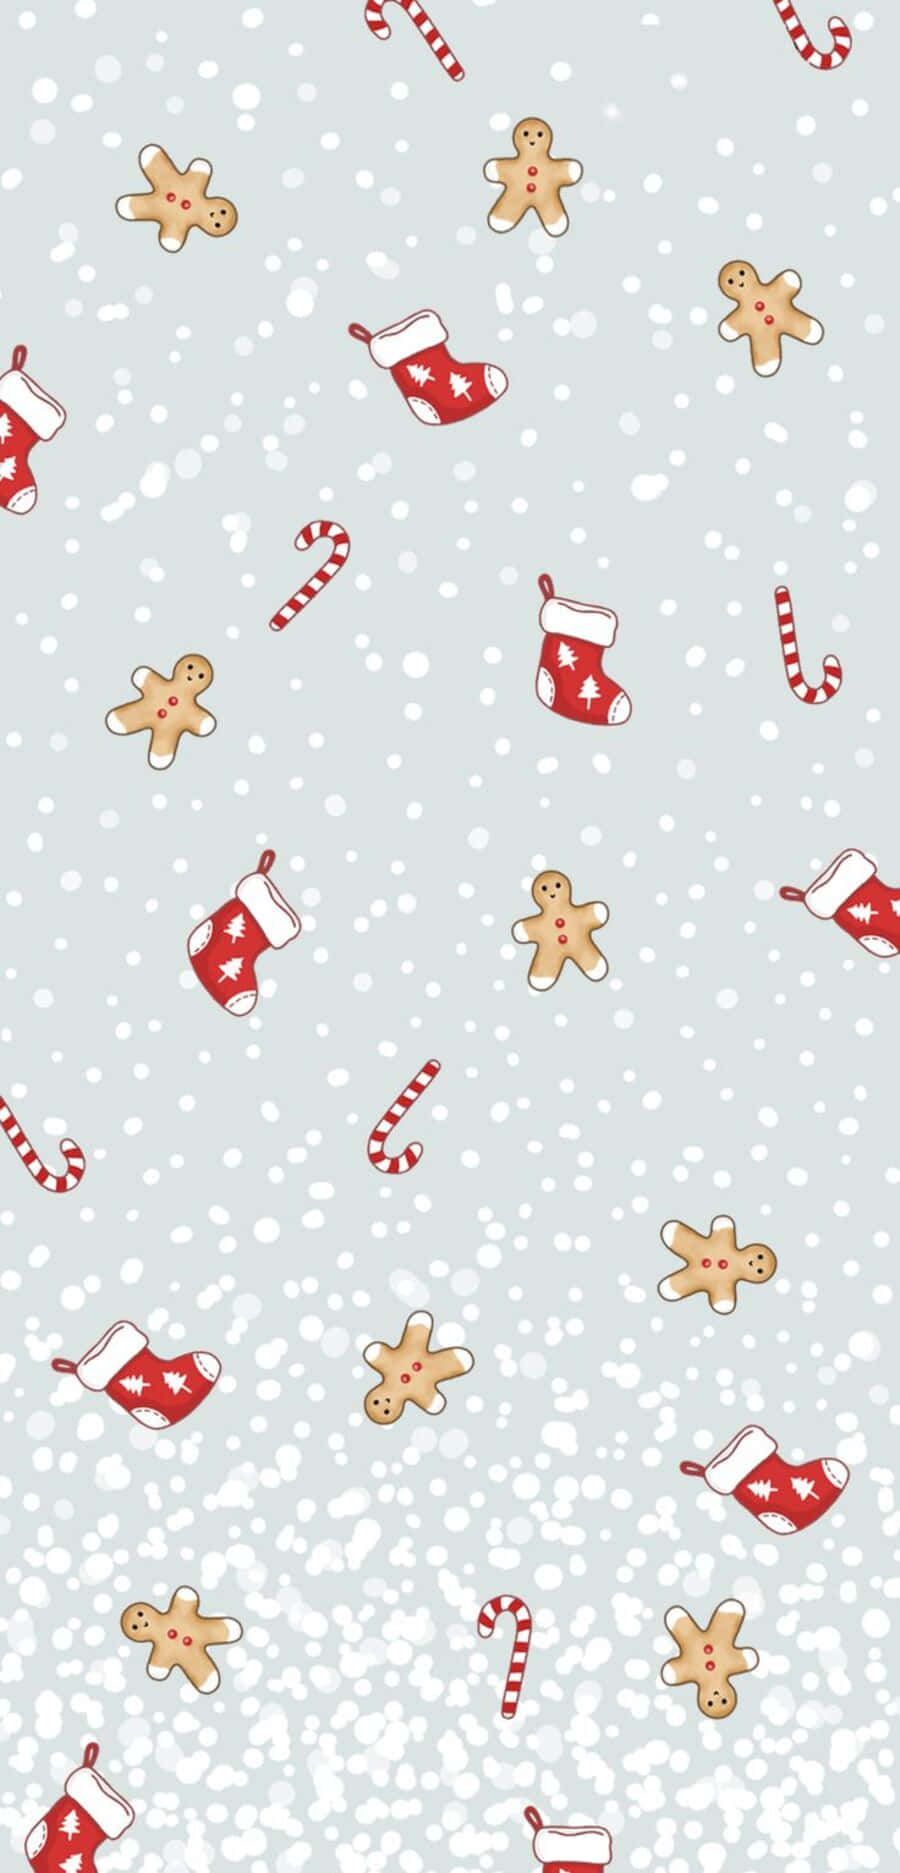 Embrace The Magic Of Winter With This Cute Winter Aesthetic Wallpaper